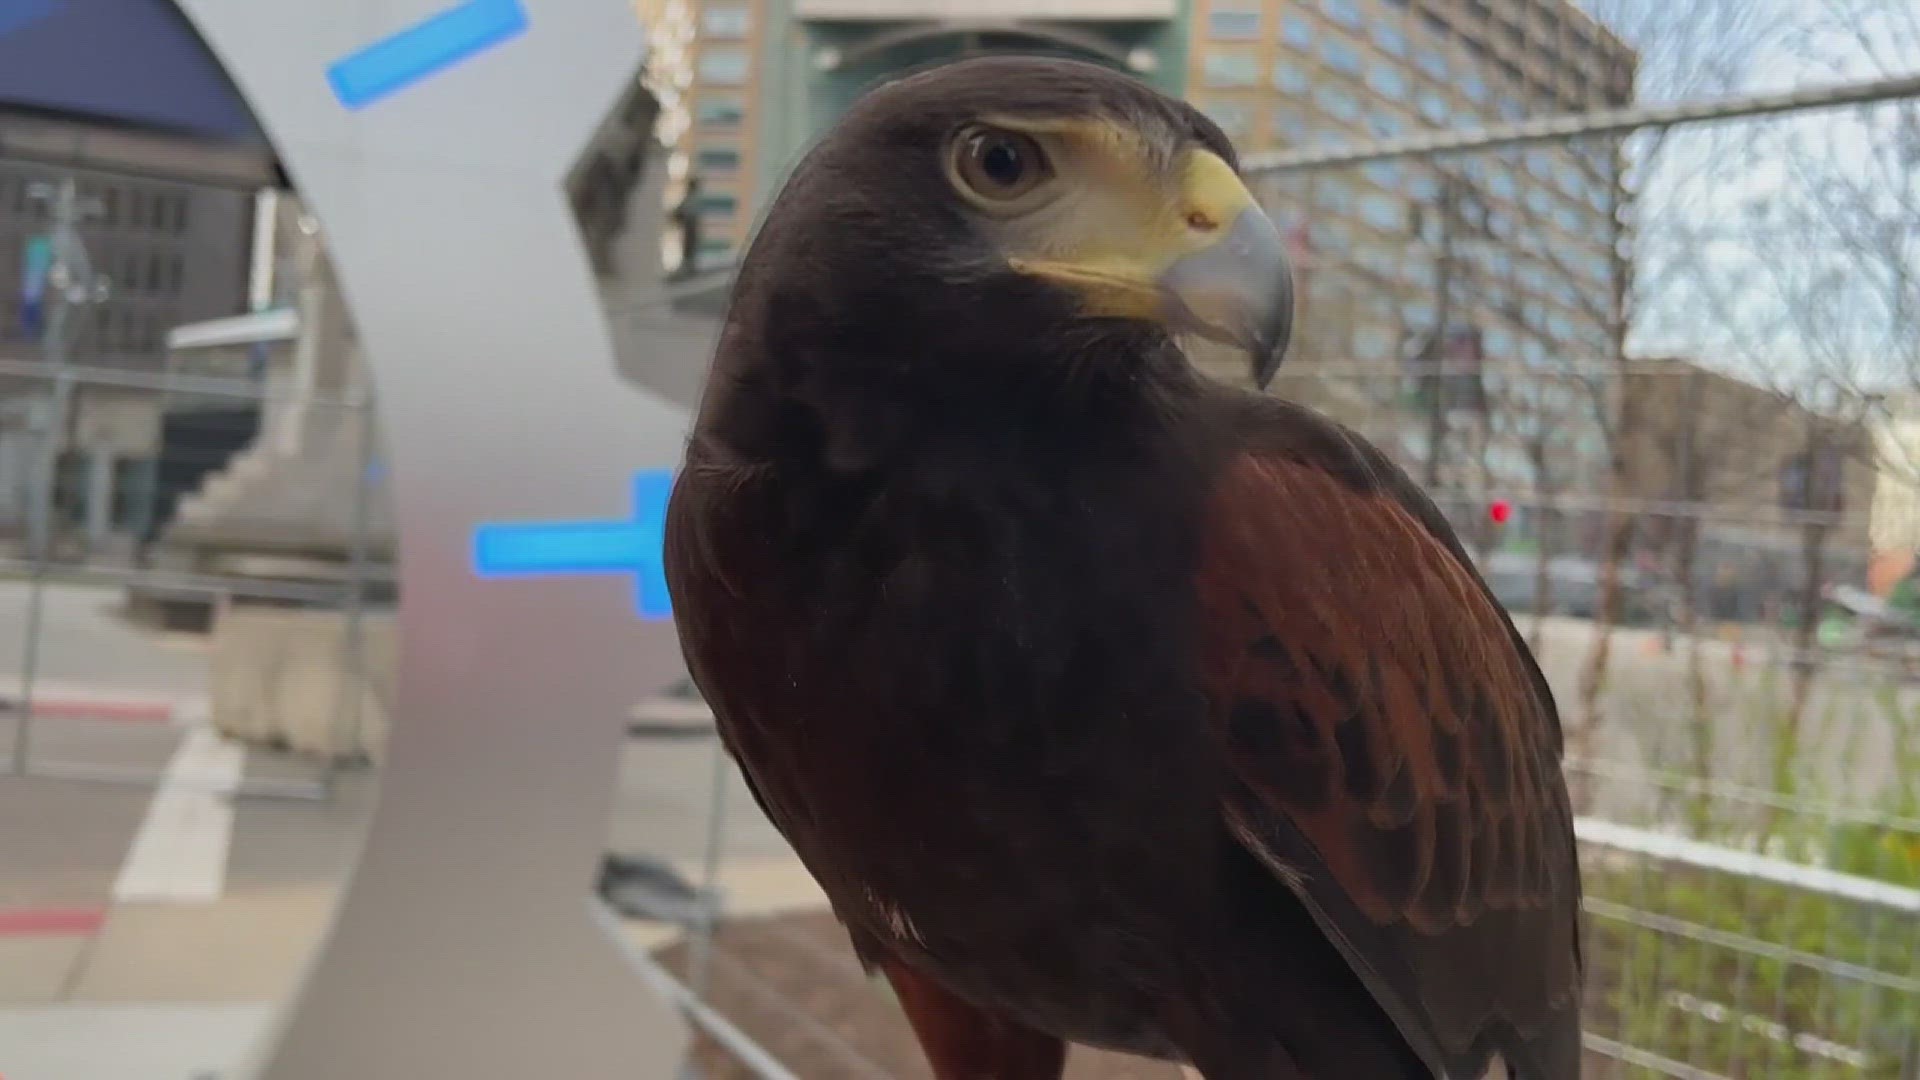 Ahead of the NFL Draft, a falcon and a hawk are on "poop duty" to keep smaller birds away from making a mess in Detroit’s streets.